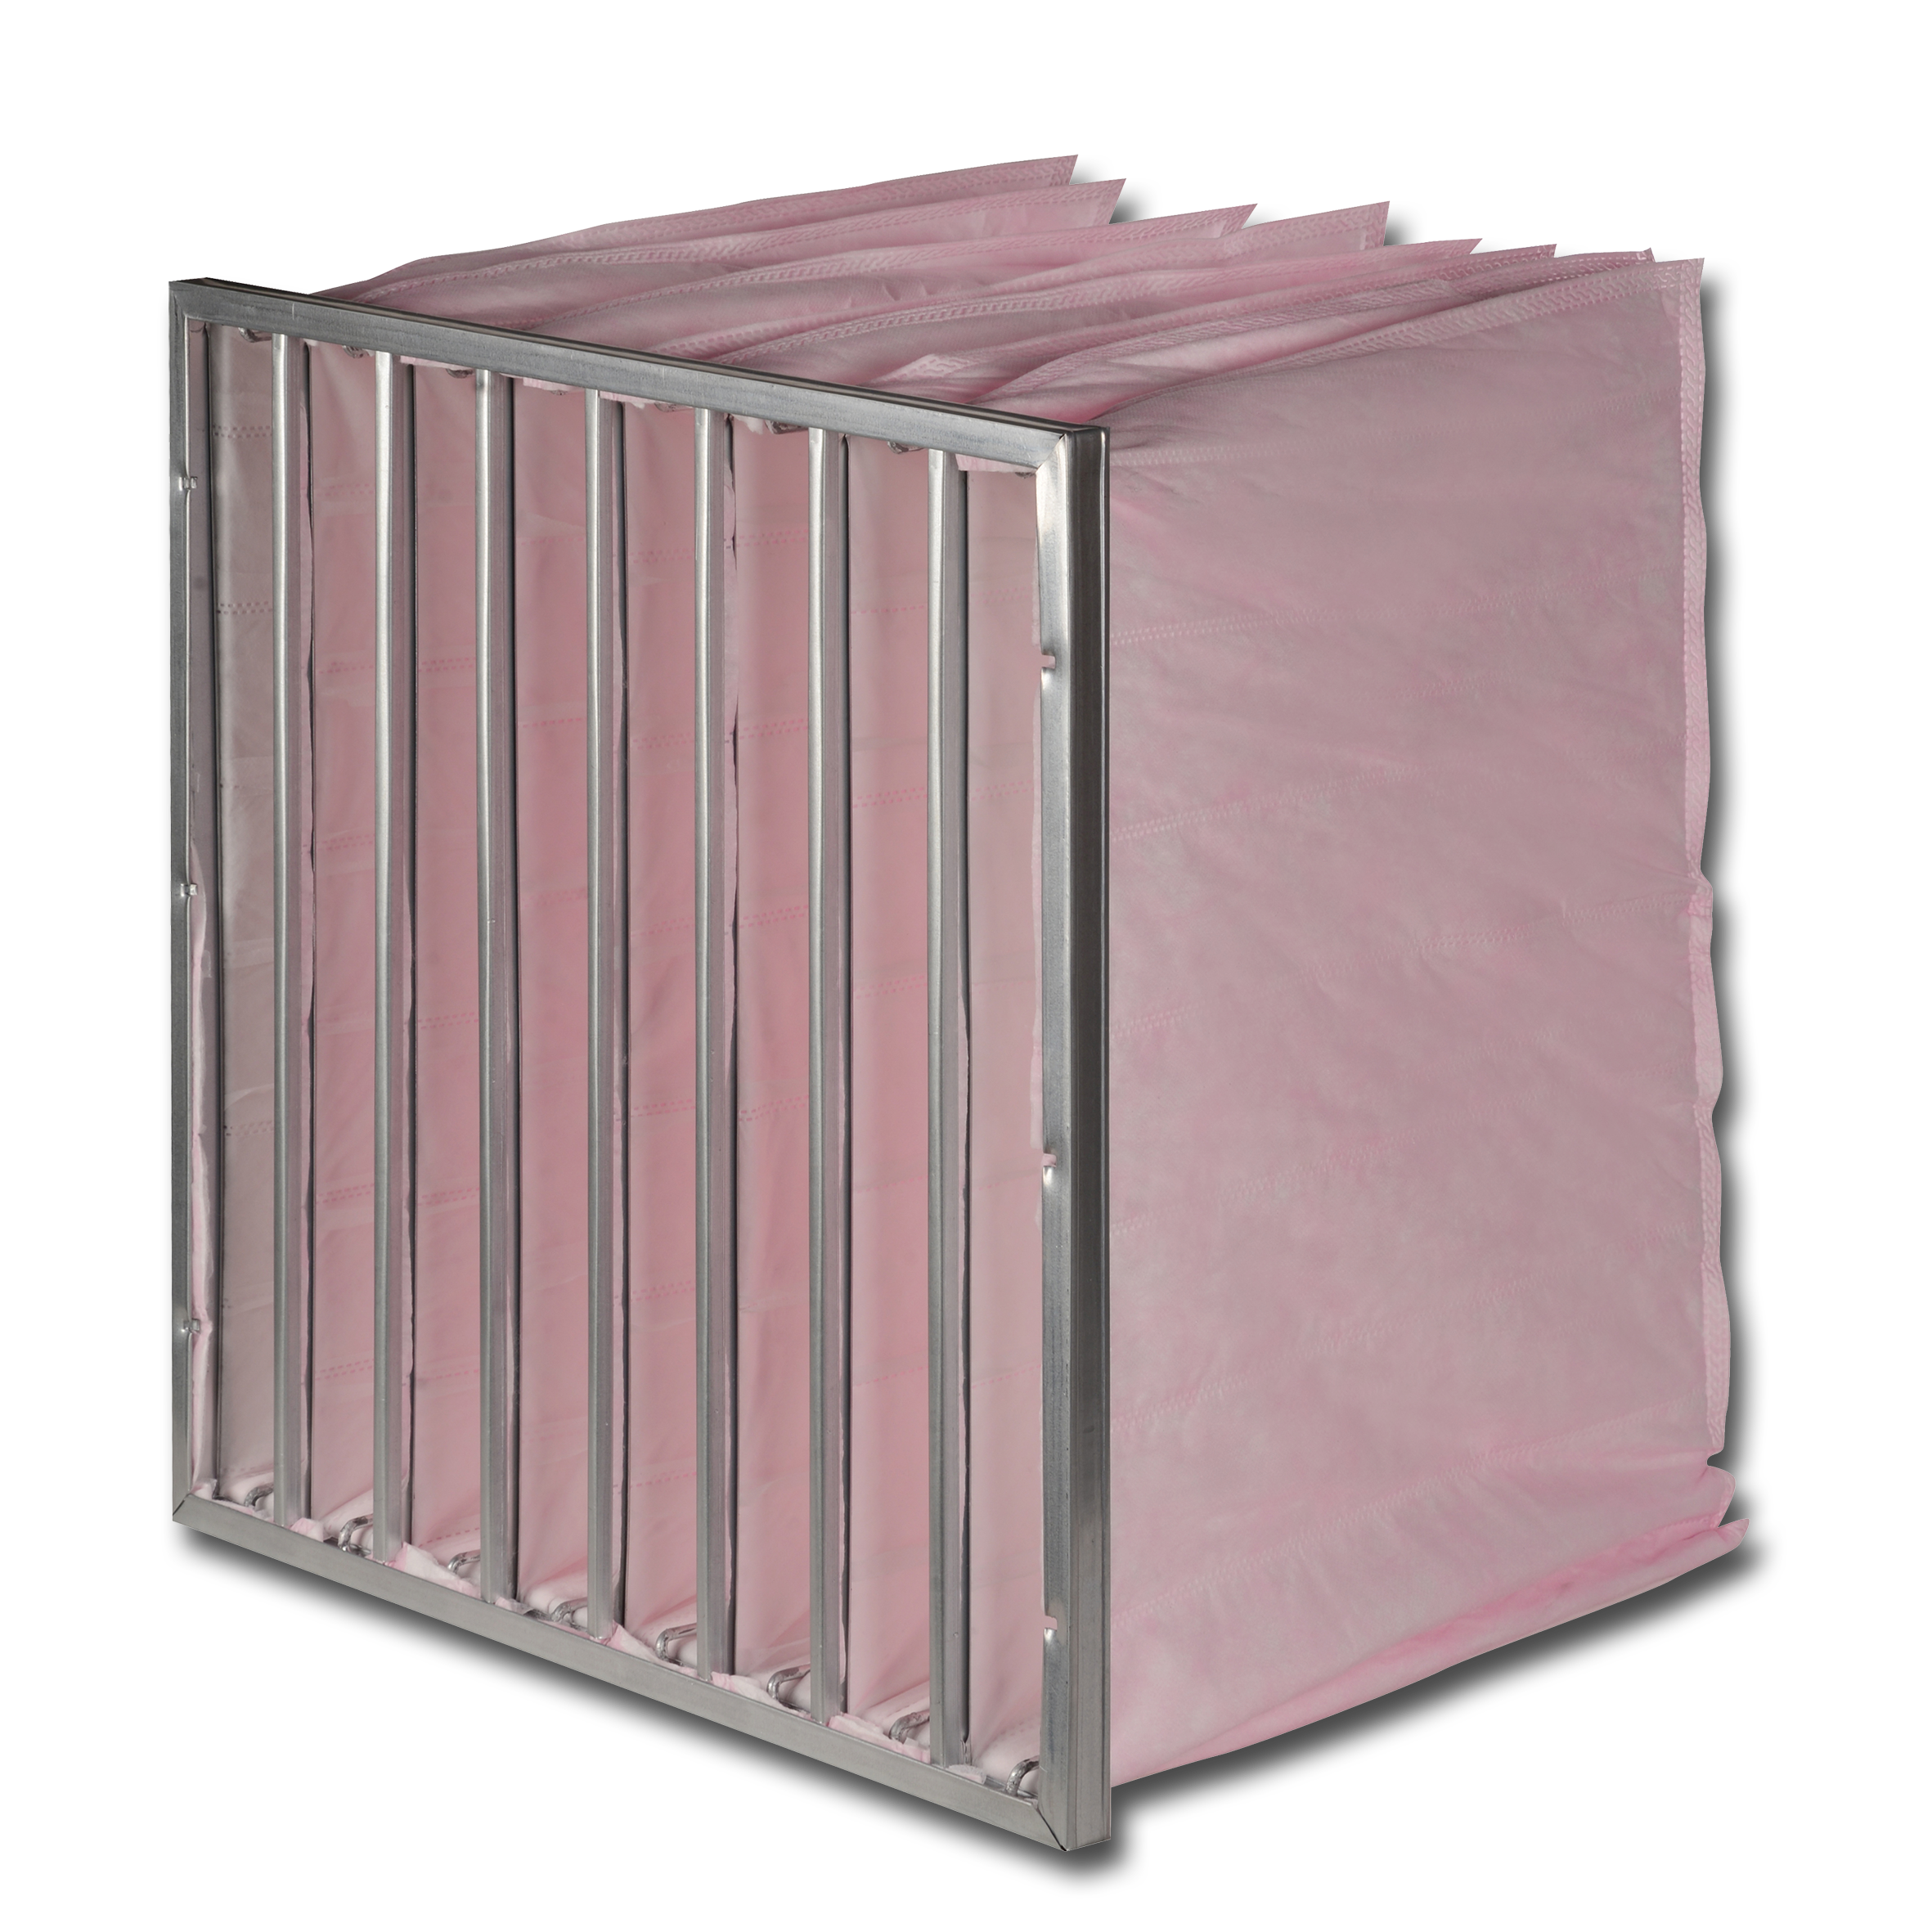 Highly preferred filter model with the advantage of high filter surface area, low cost and service life in the case of ventilation systems with a wider filter installation area for the filters.